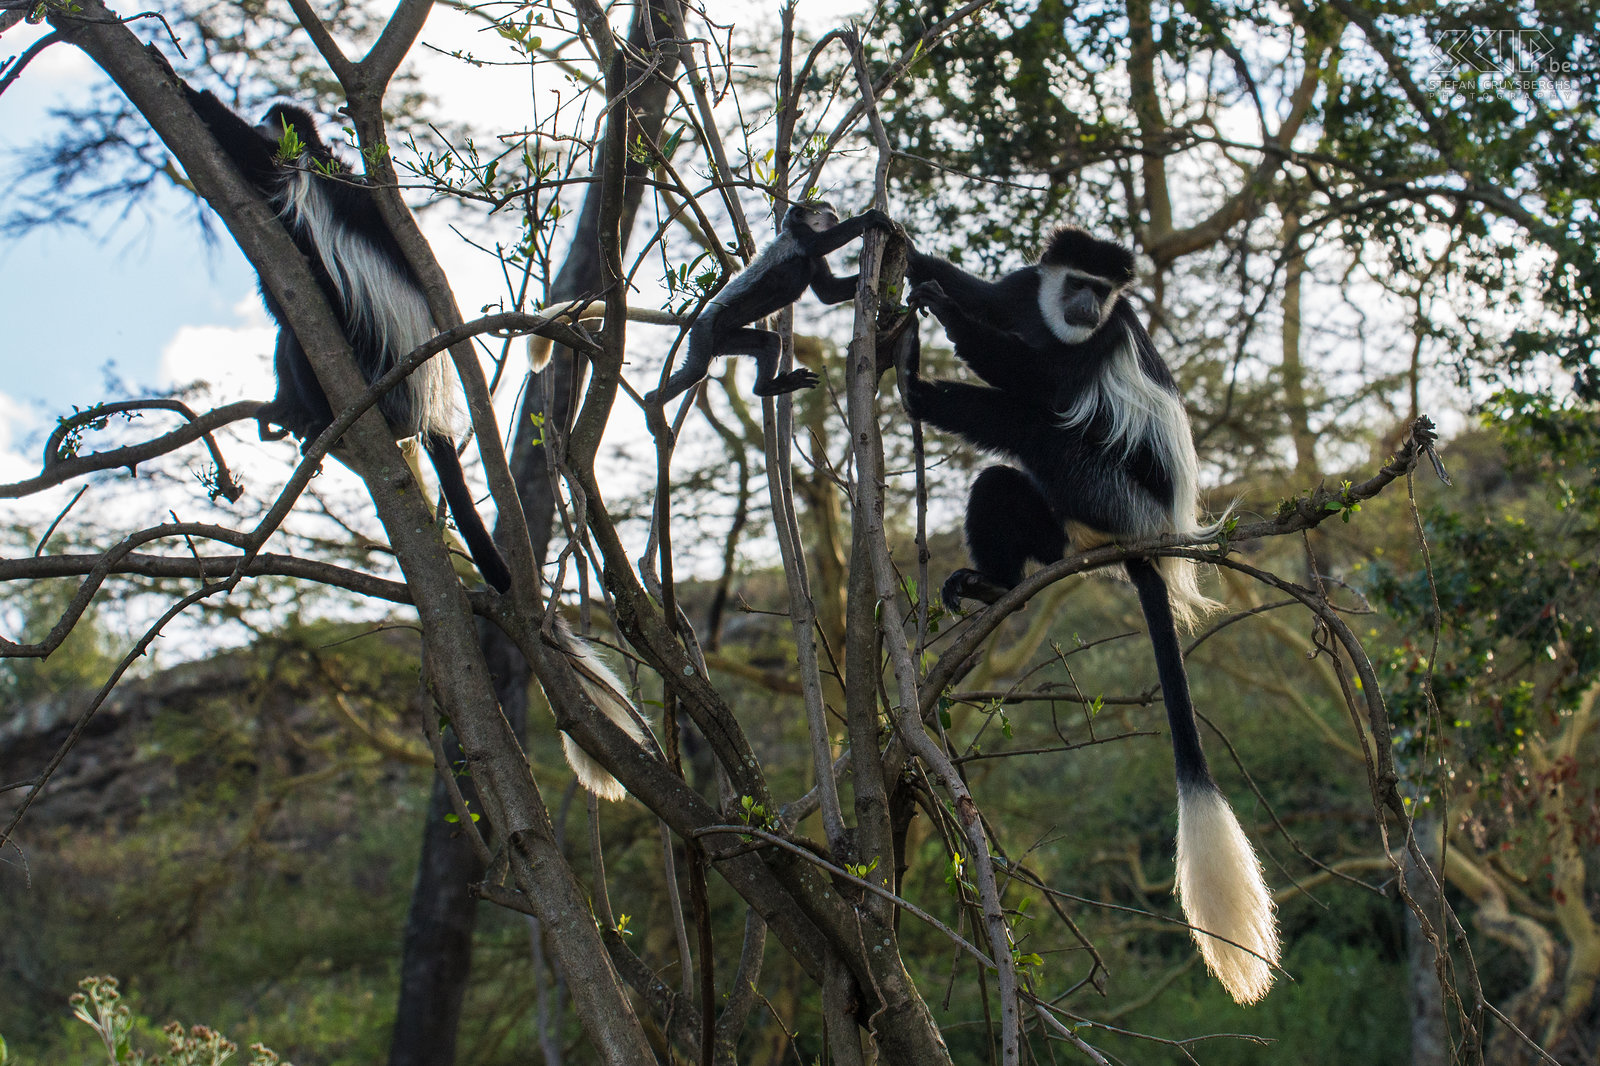 Naivasha - Crater Lake - Colobus monkeys Near the lodge of Crater Lake we found a group of black-and-white colobus monkeys (Mantled guereza, Colobus guereza) with some playful young monkeys. Stefan Cruysberghs